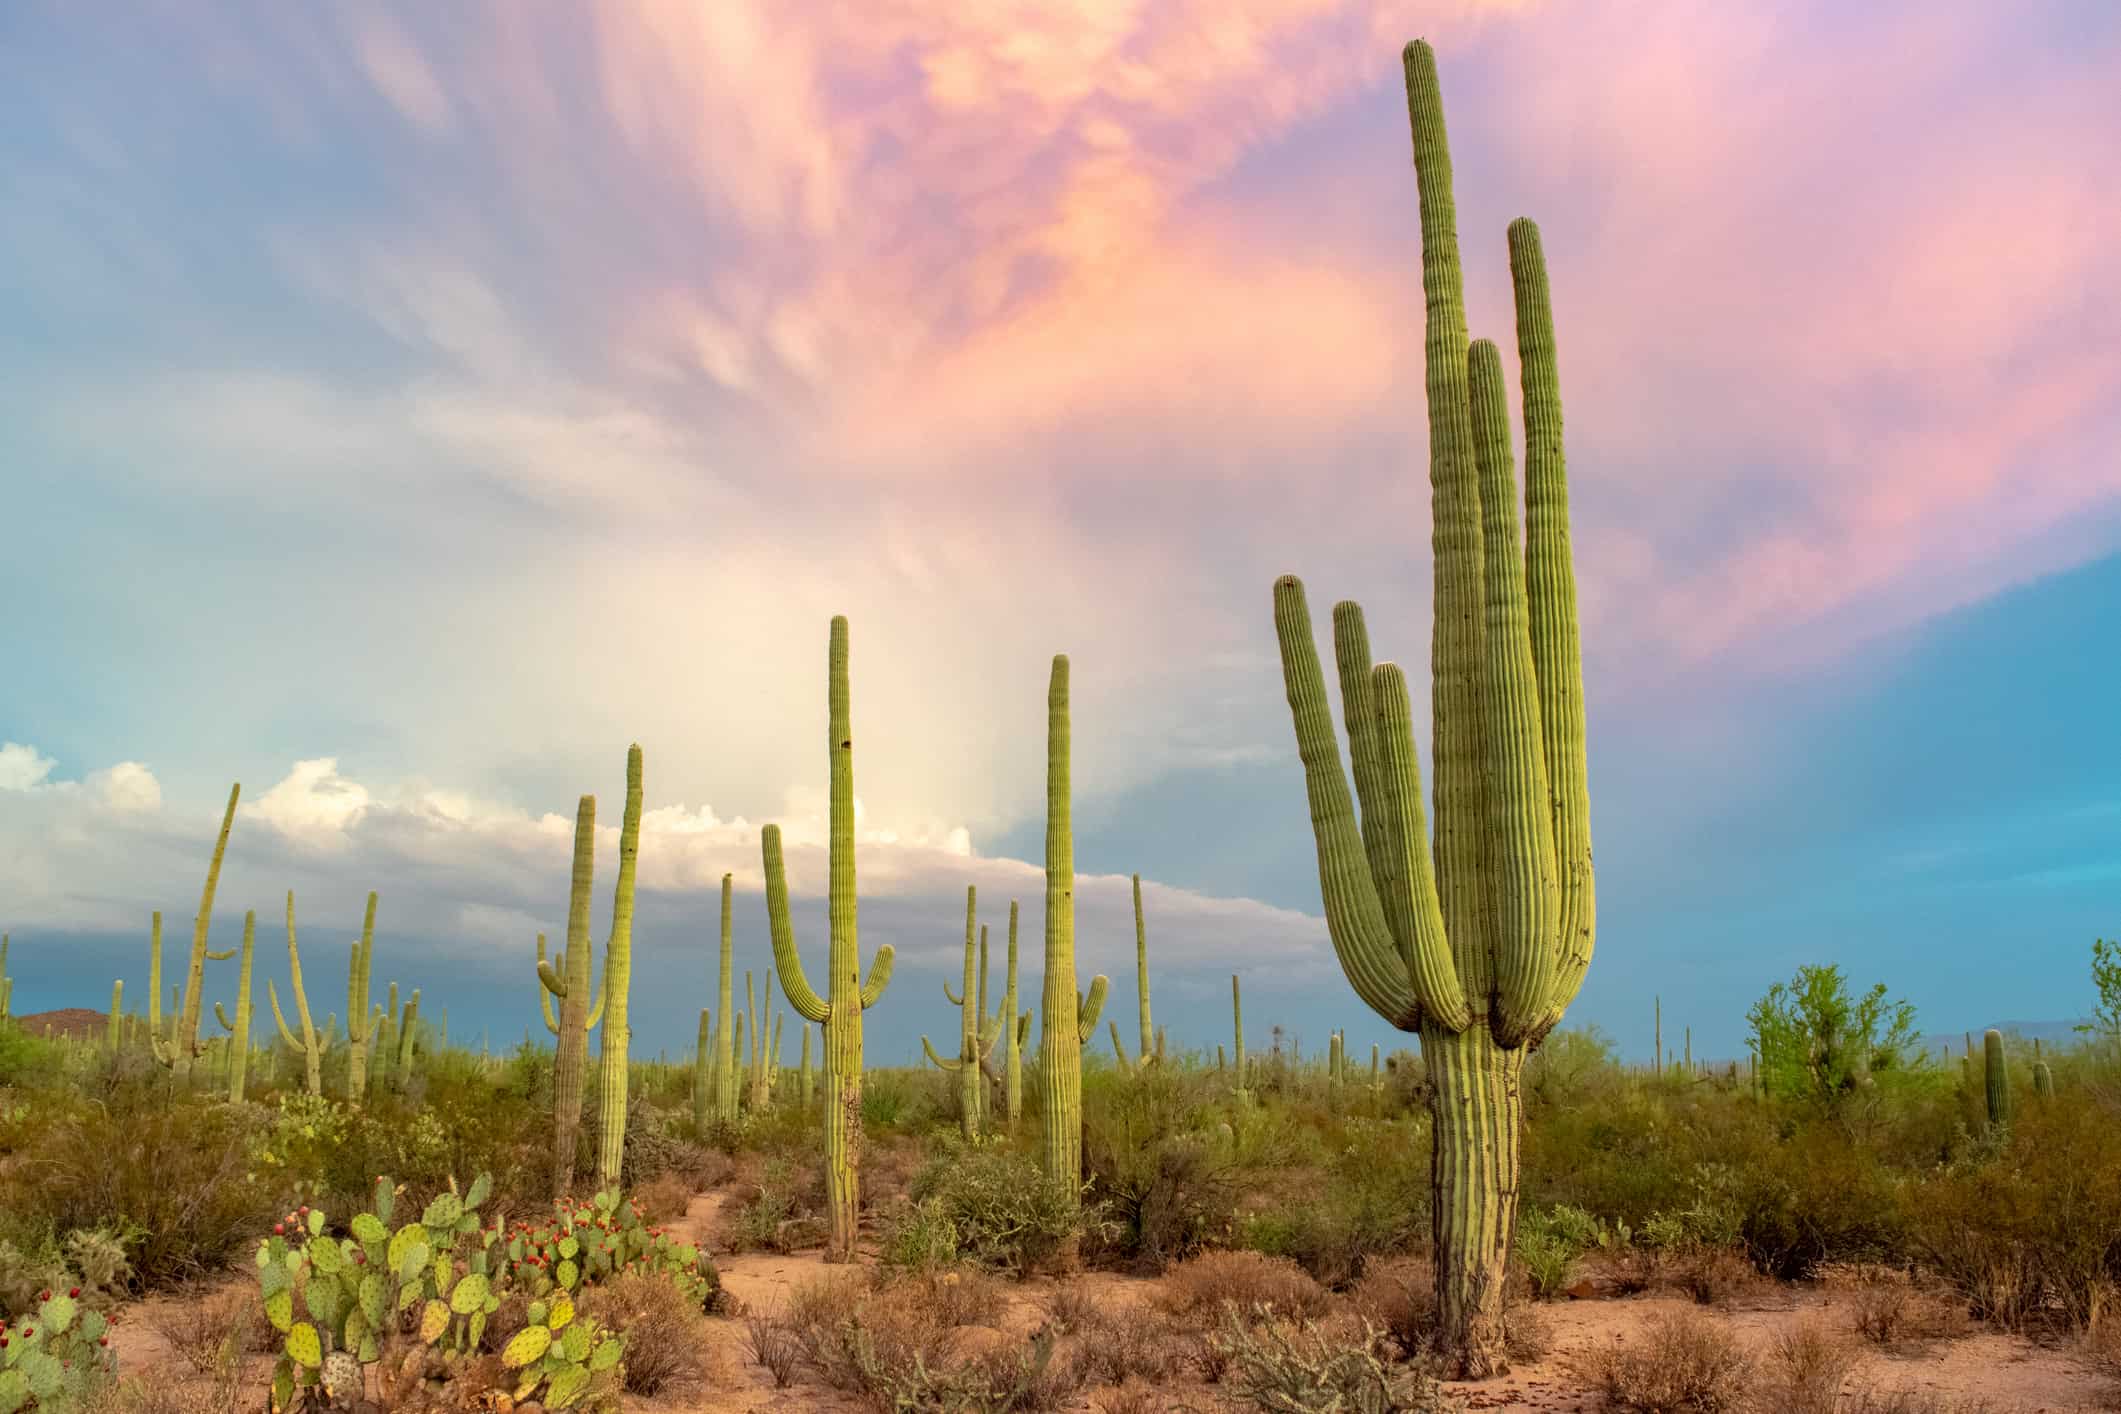 Discover 10 Resilient Plants That Can Thrive in a Desert - AZ Animals